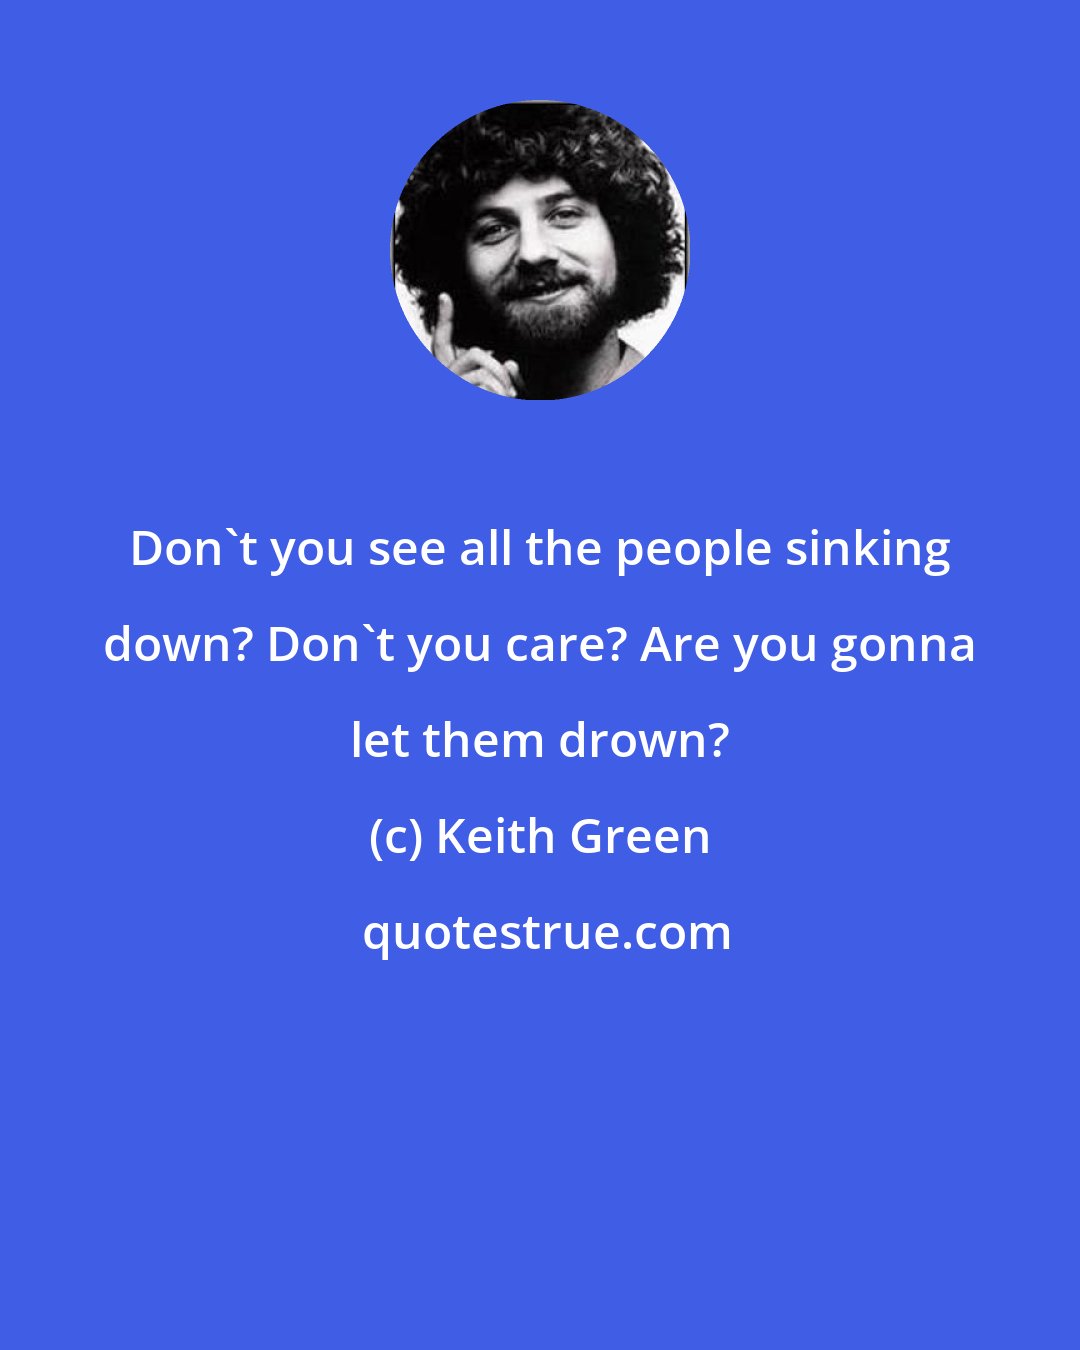 Keith Green: Don't you see all the people sinking down? Don't you care? Are you gonna let them drown?